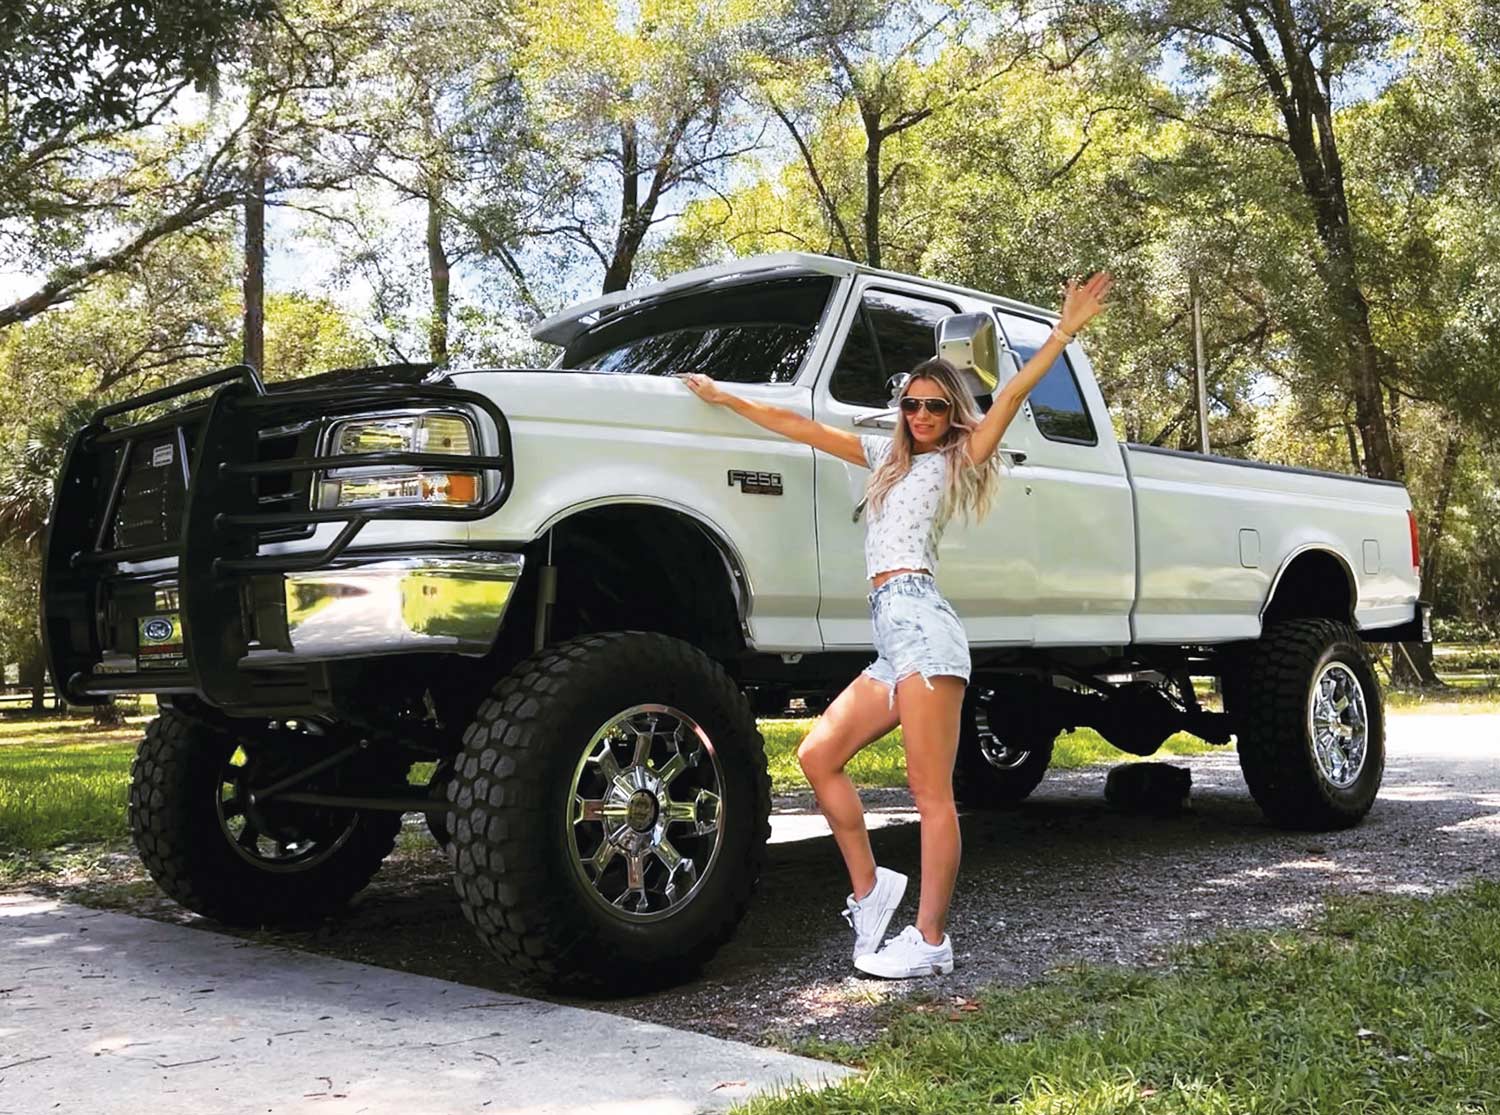 Lindsay Rivera next to her truck